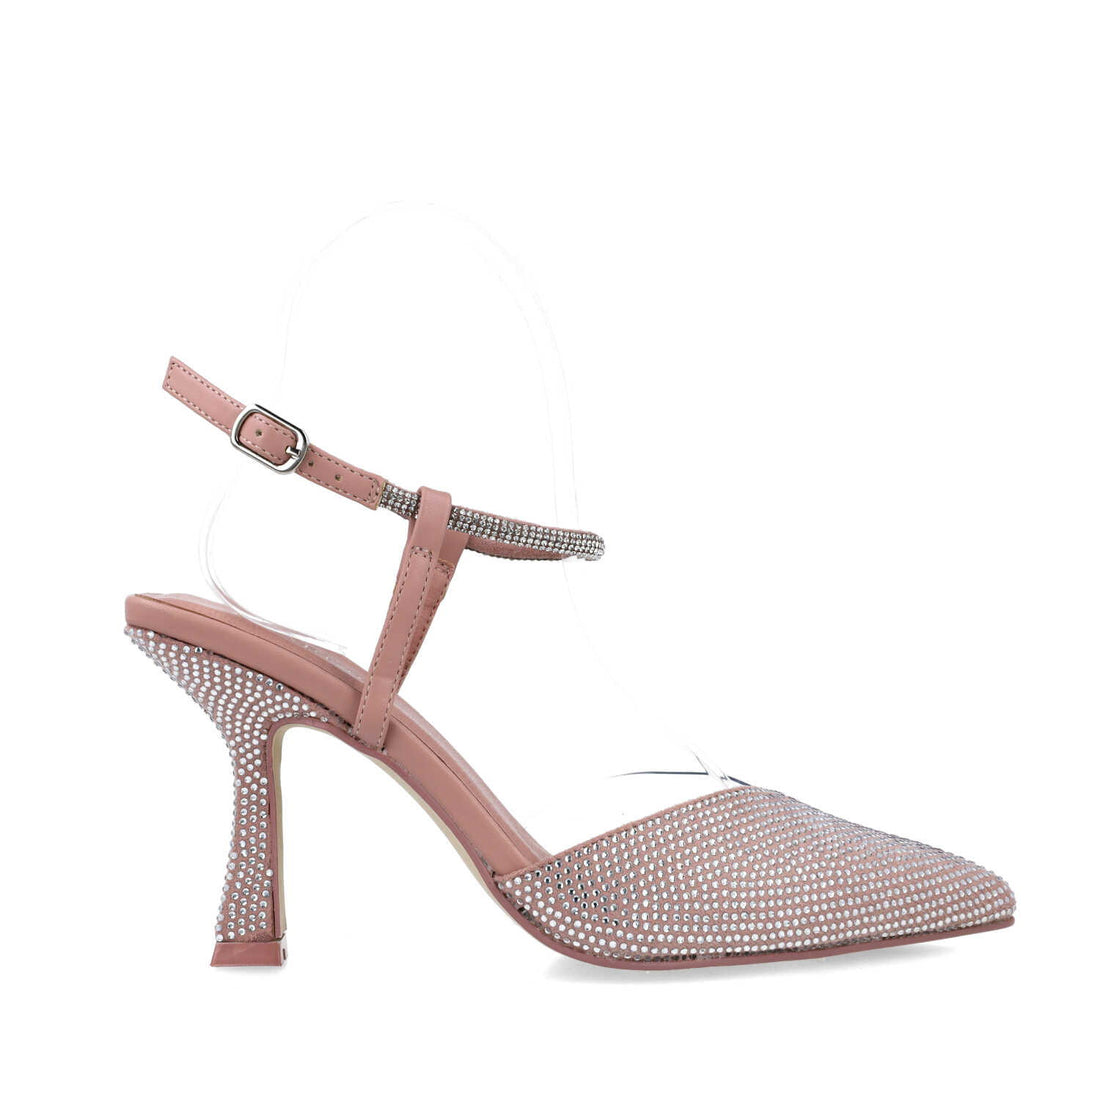 Nude Pumps With Ankle Strap_24738_97_01